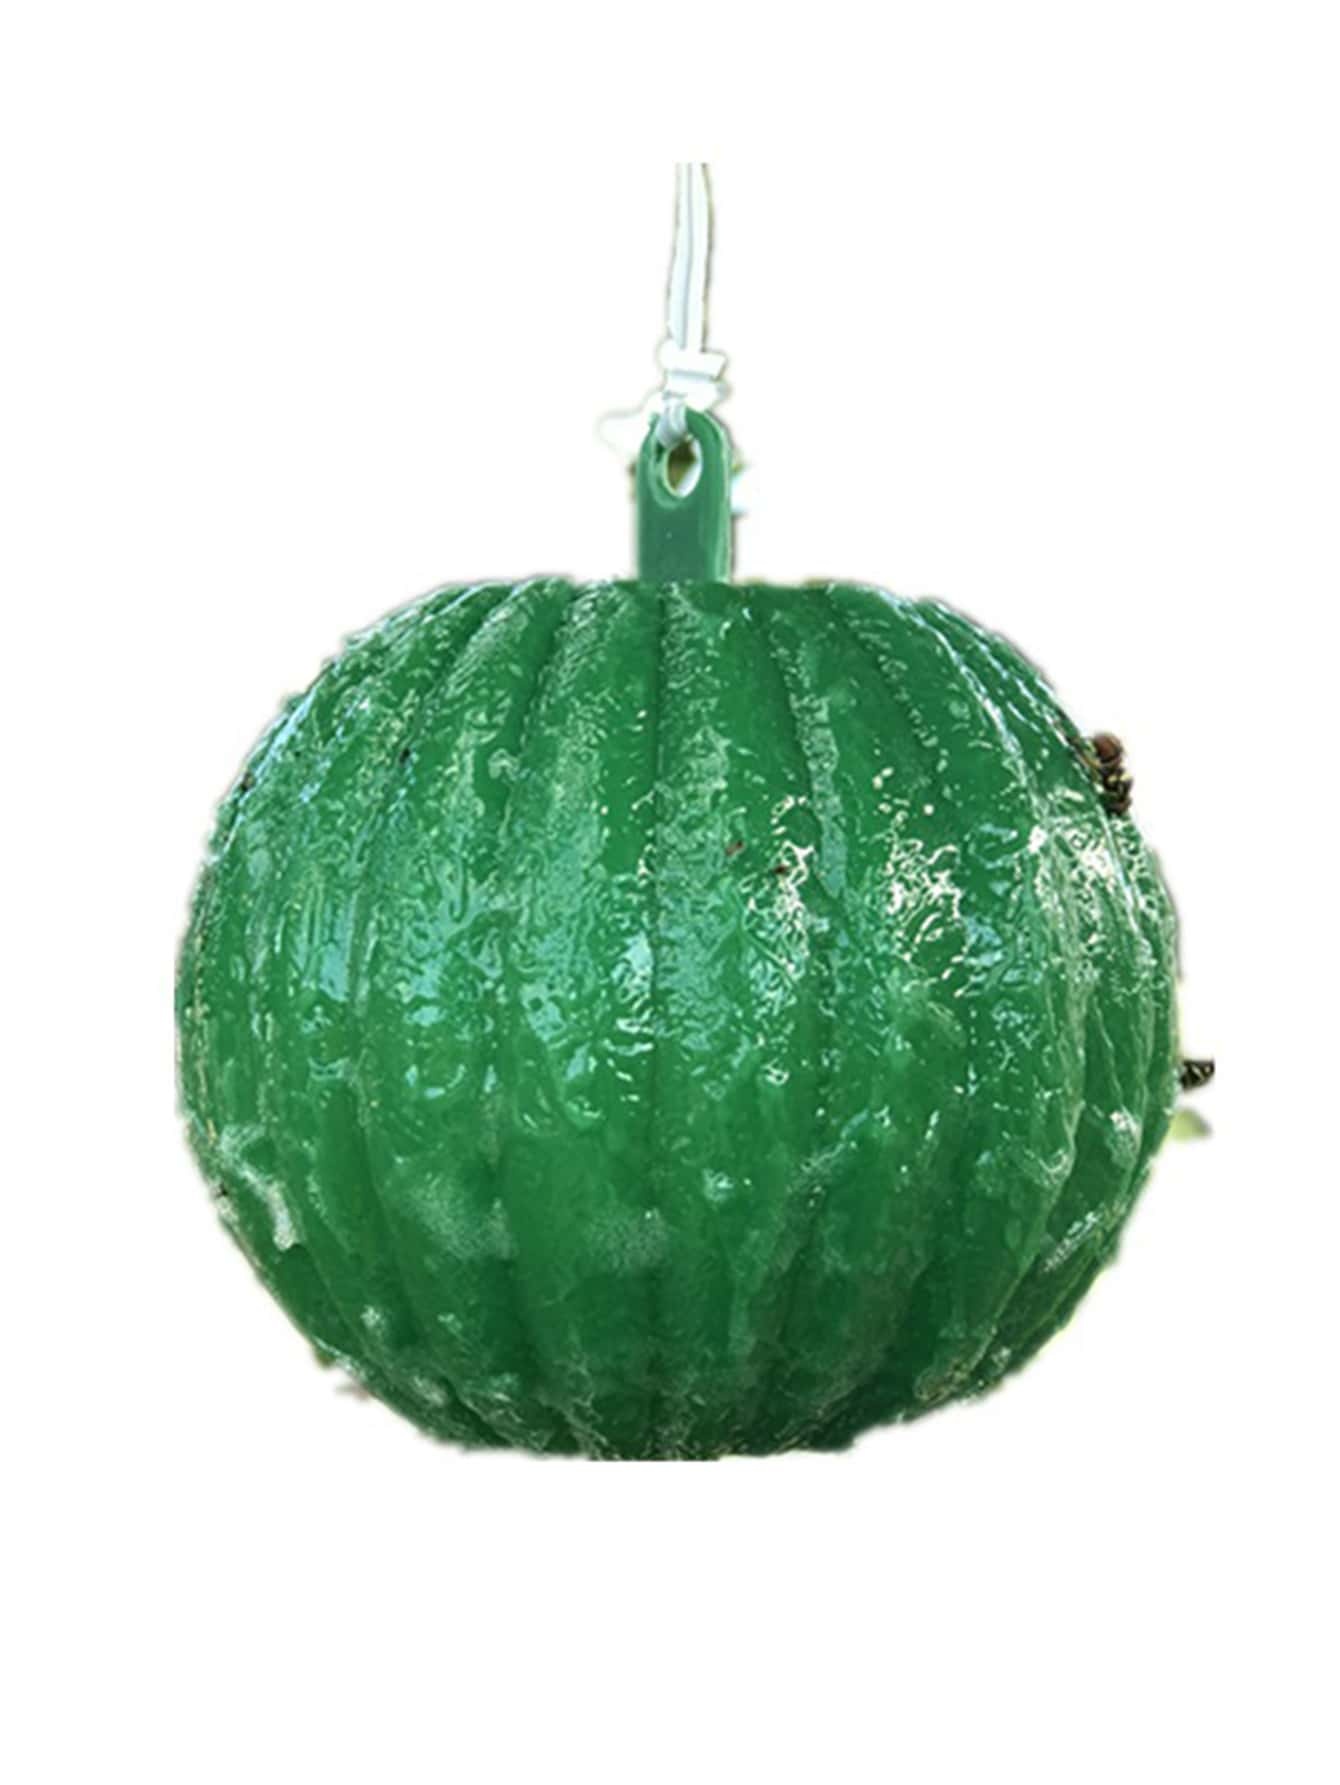 1pc Pumpkin Shape Sticky Fly Trap Ball, Orange Creative Plant Protector, For Outdoor